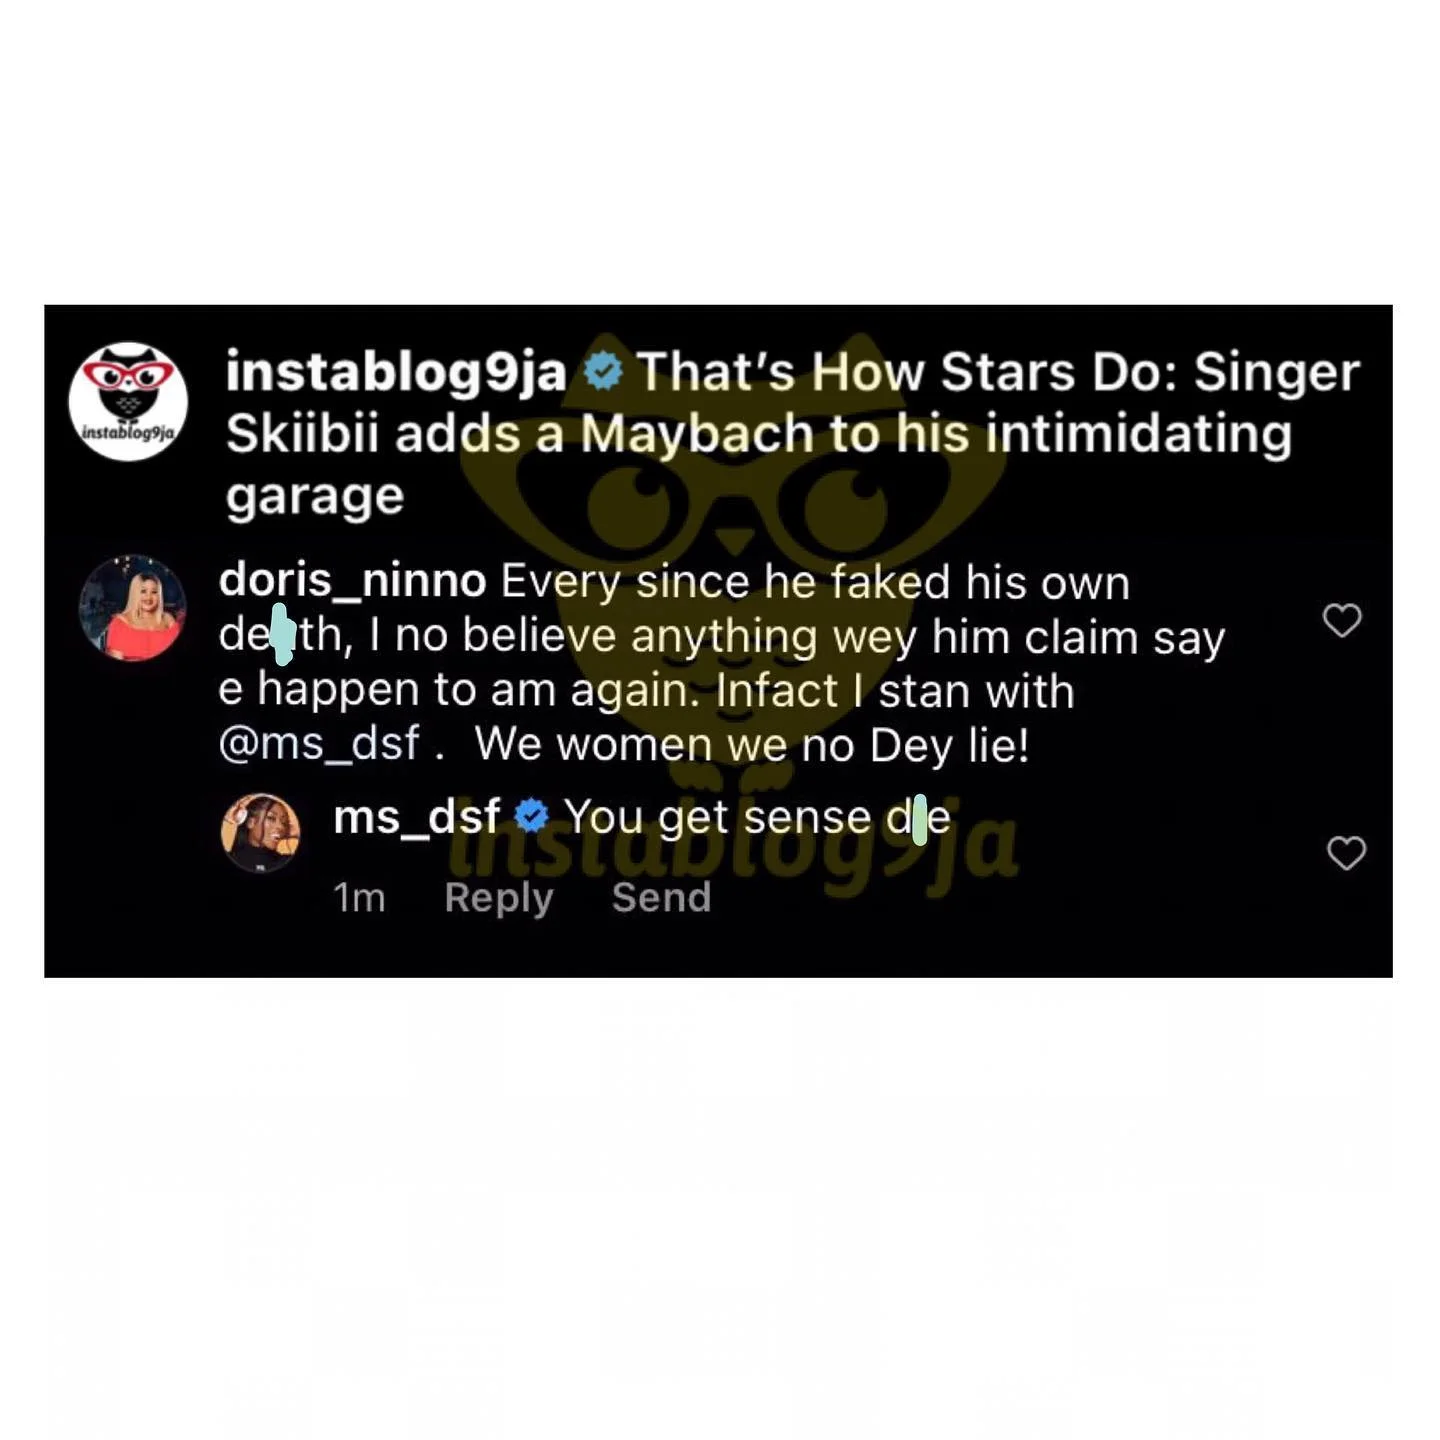 Dorcas Fapson shades her ex, Skiibii hours after he showed off his new Maybach - 318236799 818451692596493 920192783308356163 n